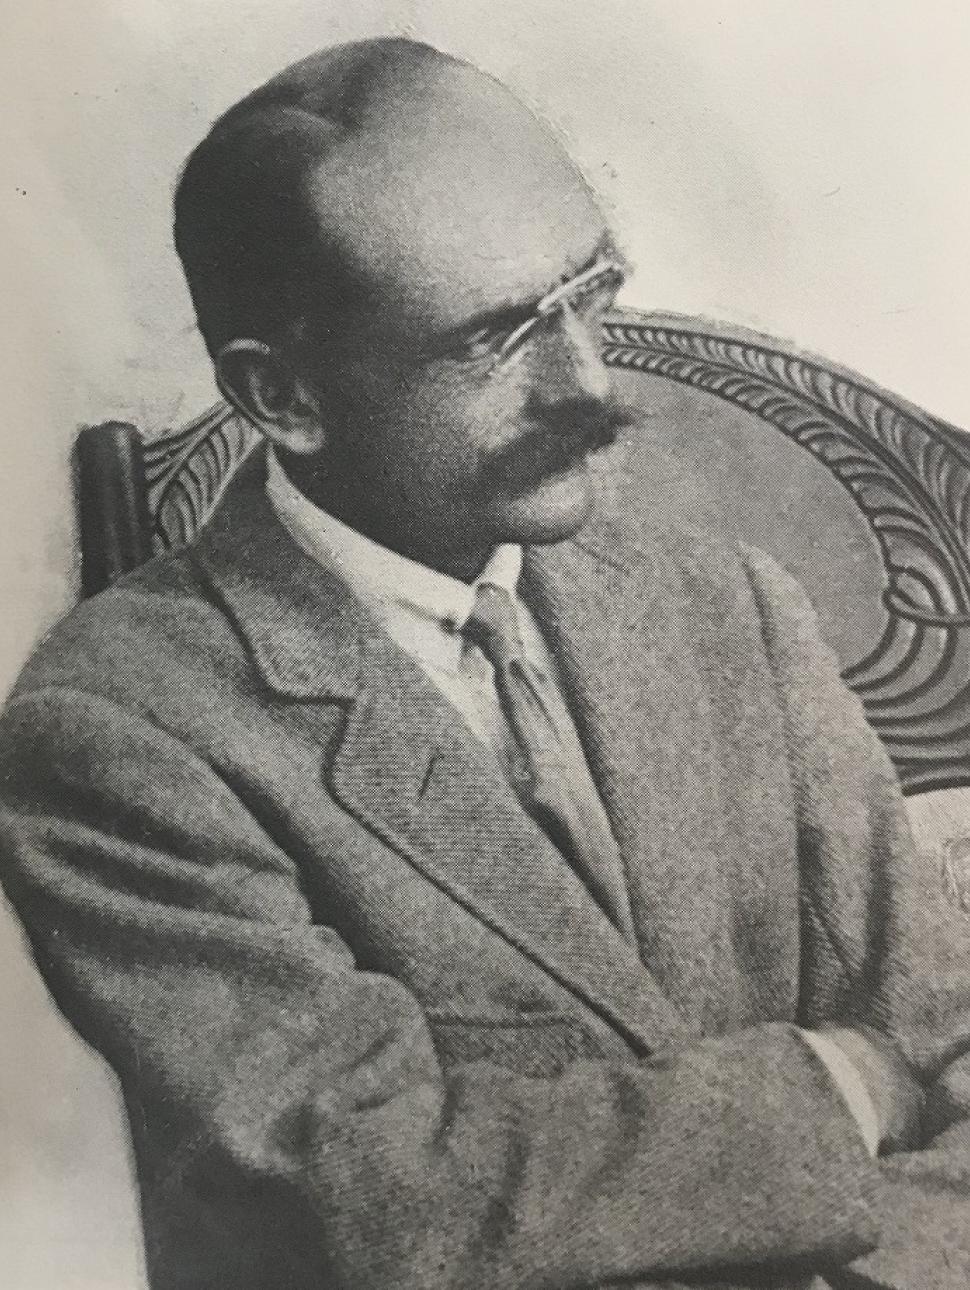 Black and white photo of balding man with a bushy mustache seated on a wooden chair wearing a suit and tie with his arms folded.  Wearing glasses he is looking away from the camera.